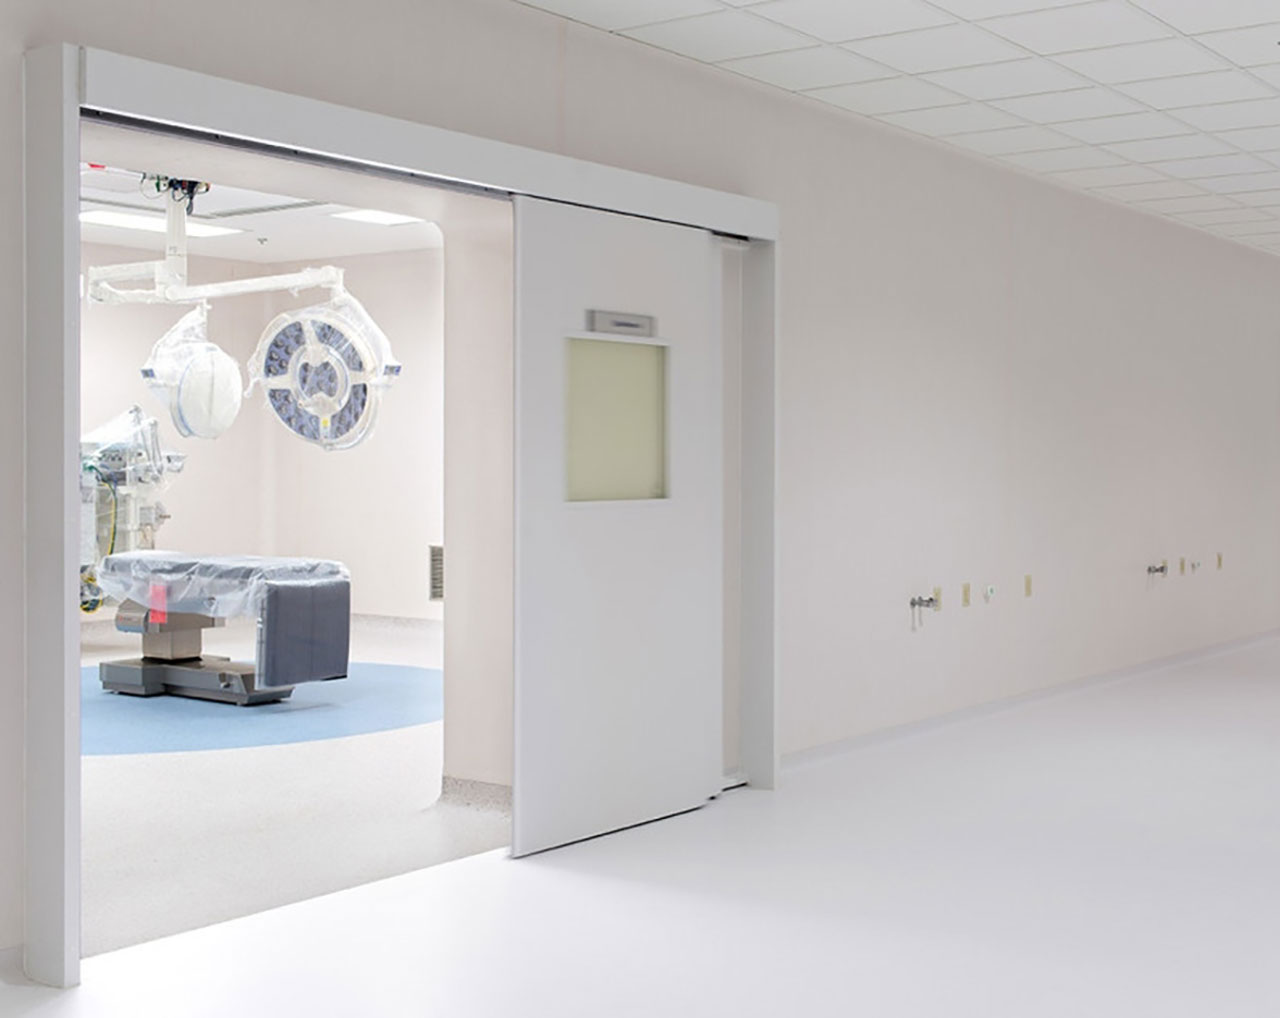 SLIDING DOOR FOR CLEANROOM Is Exactly What You Are Looking For